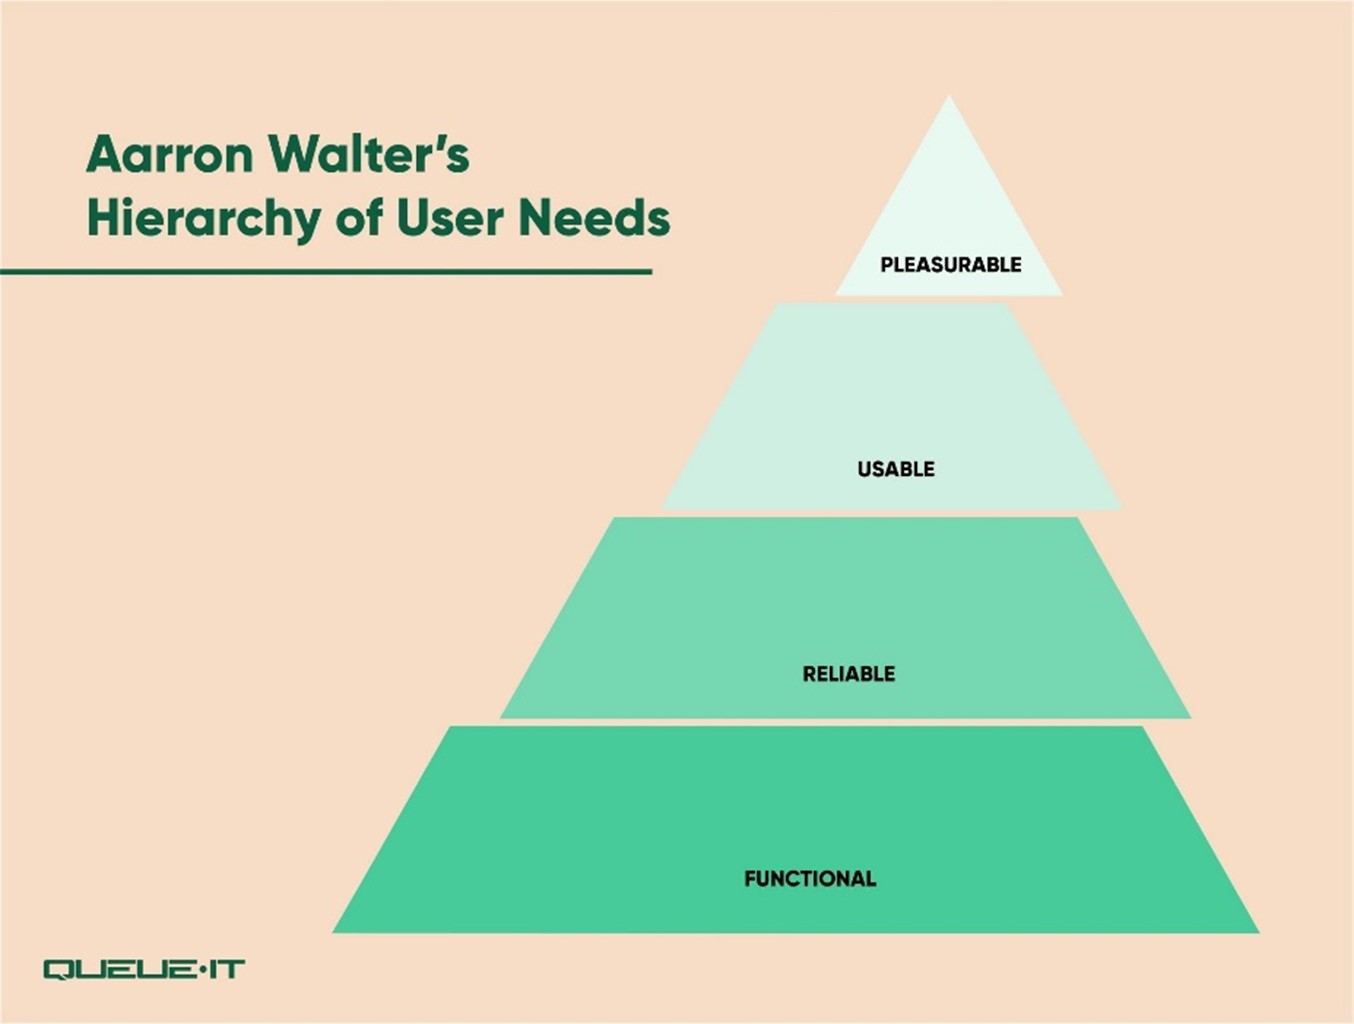 Hierarchy of user needs: functional, reliable, usable, pleasurable